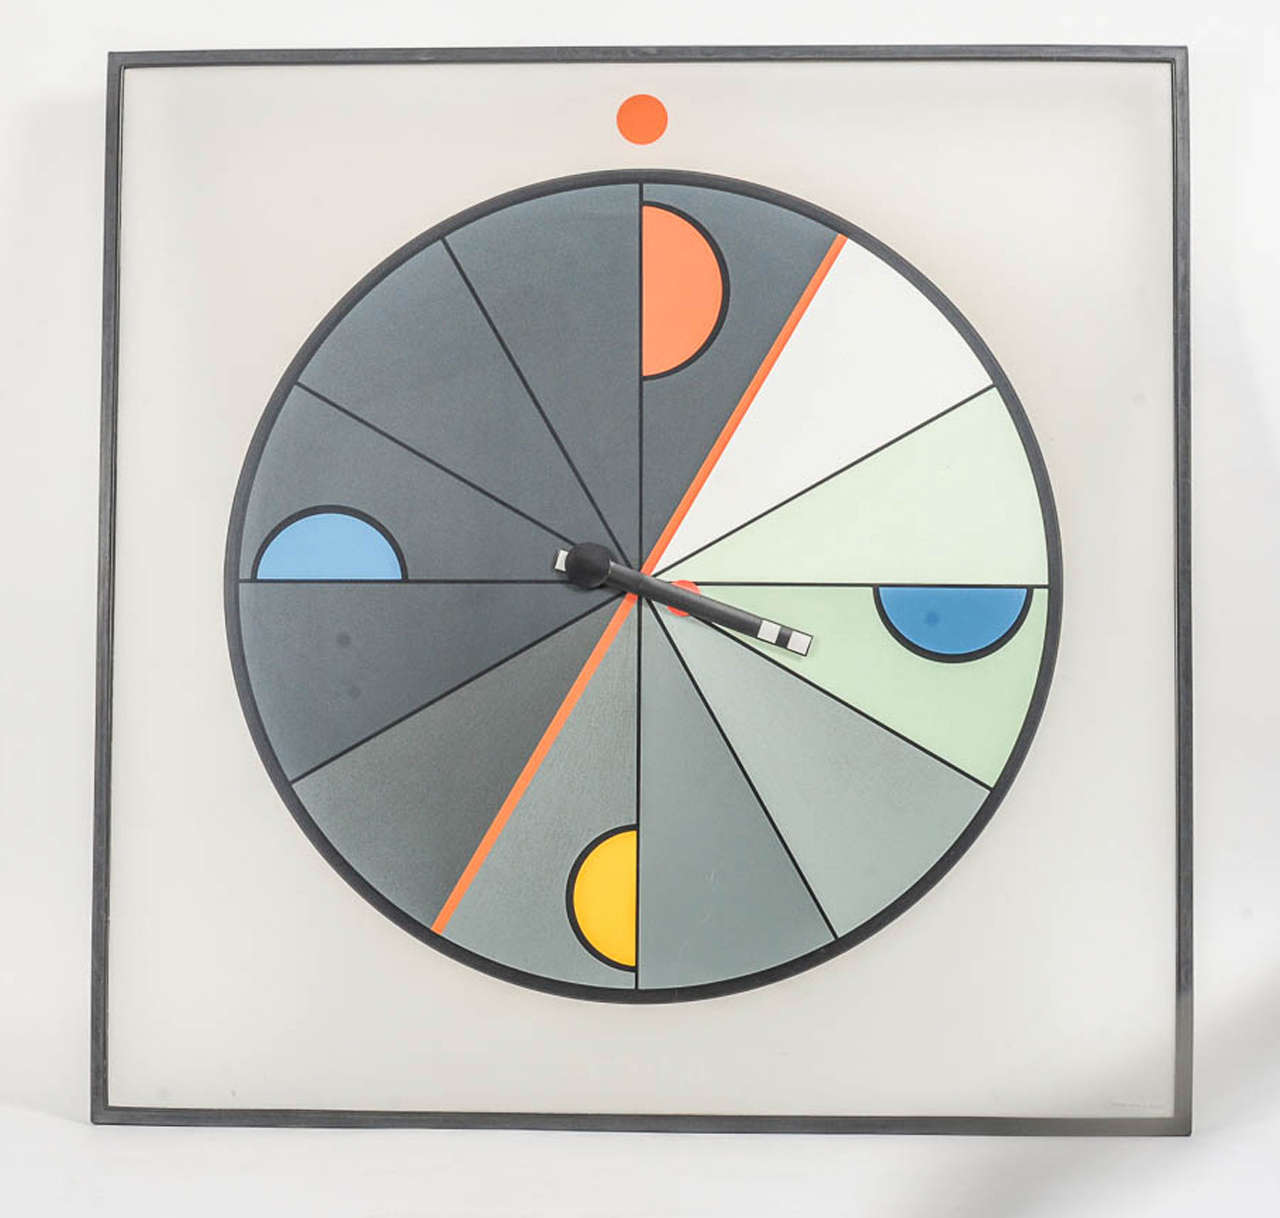 This outstanding abstract circular clock was designed by Kurt B. Delbanco in 1980 for Morphos.
Clock painted on a frame Lucite panel of 32 x 32 inches.
Battery operated.